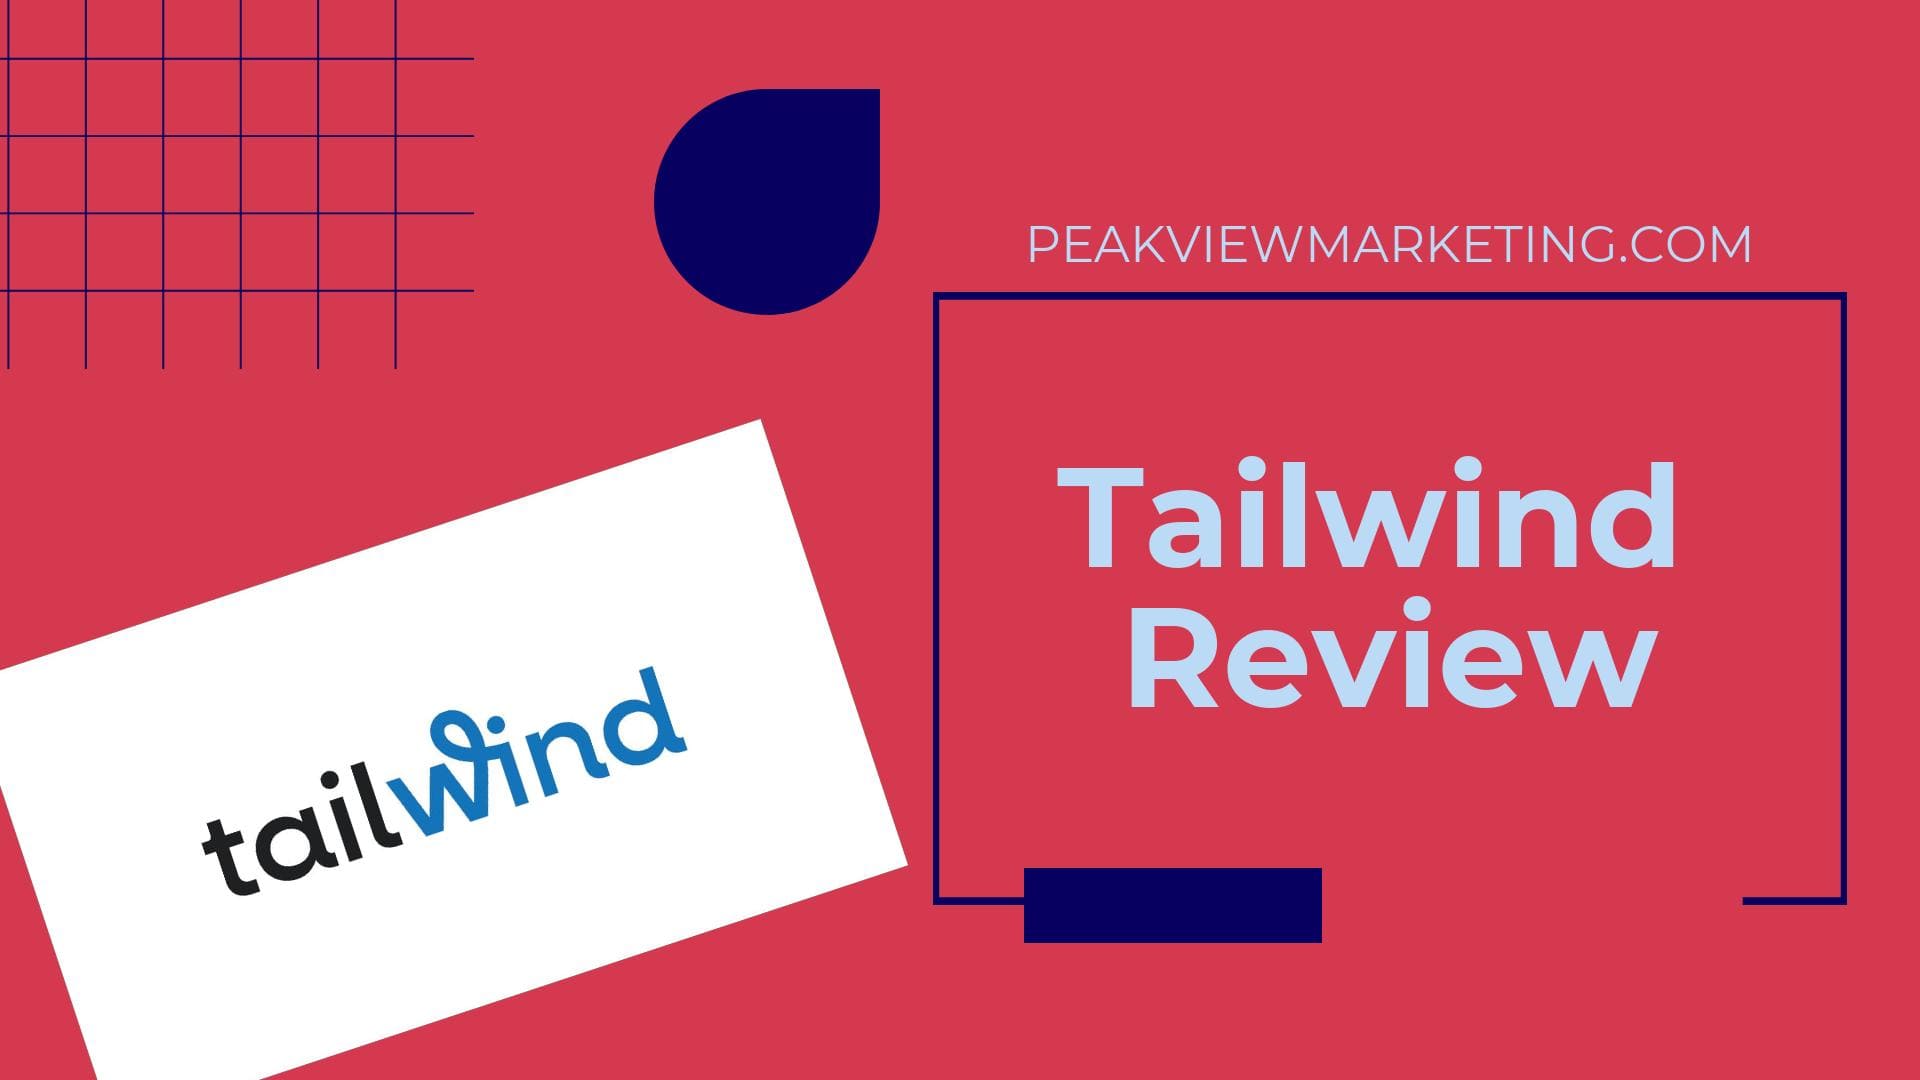 Tailwind Review Image